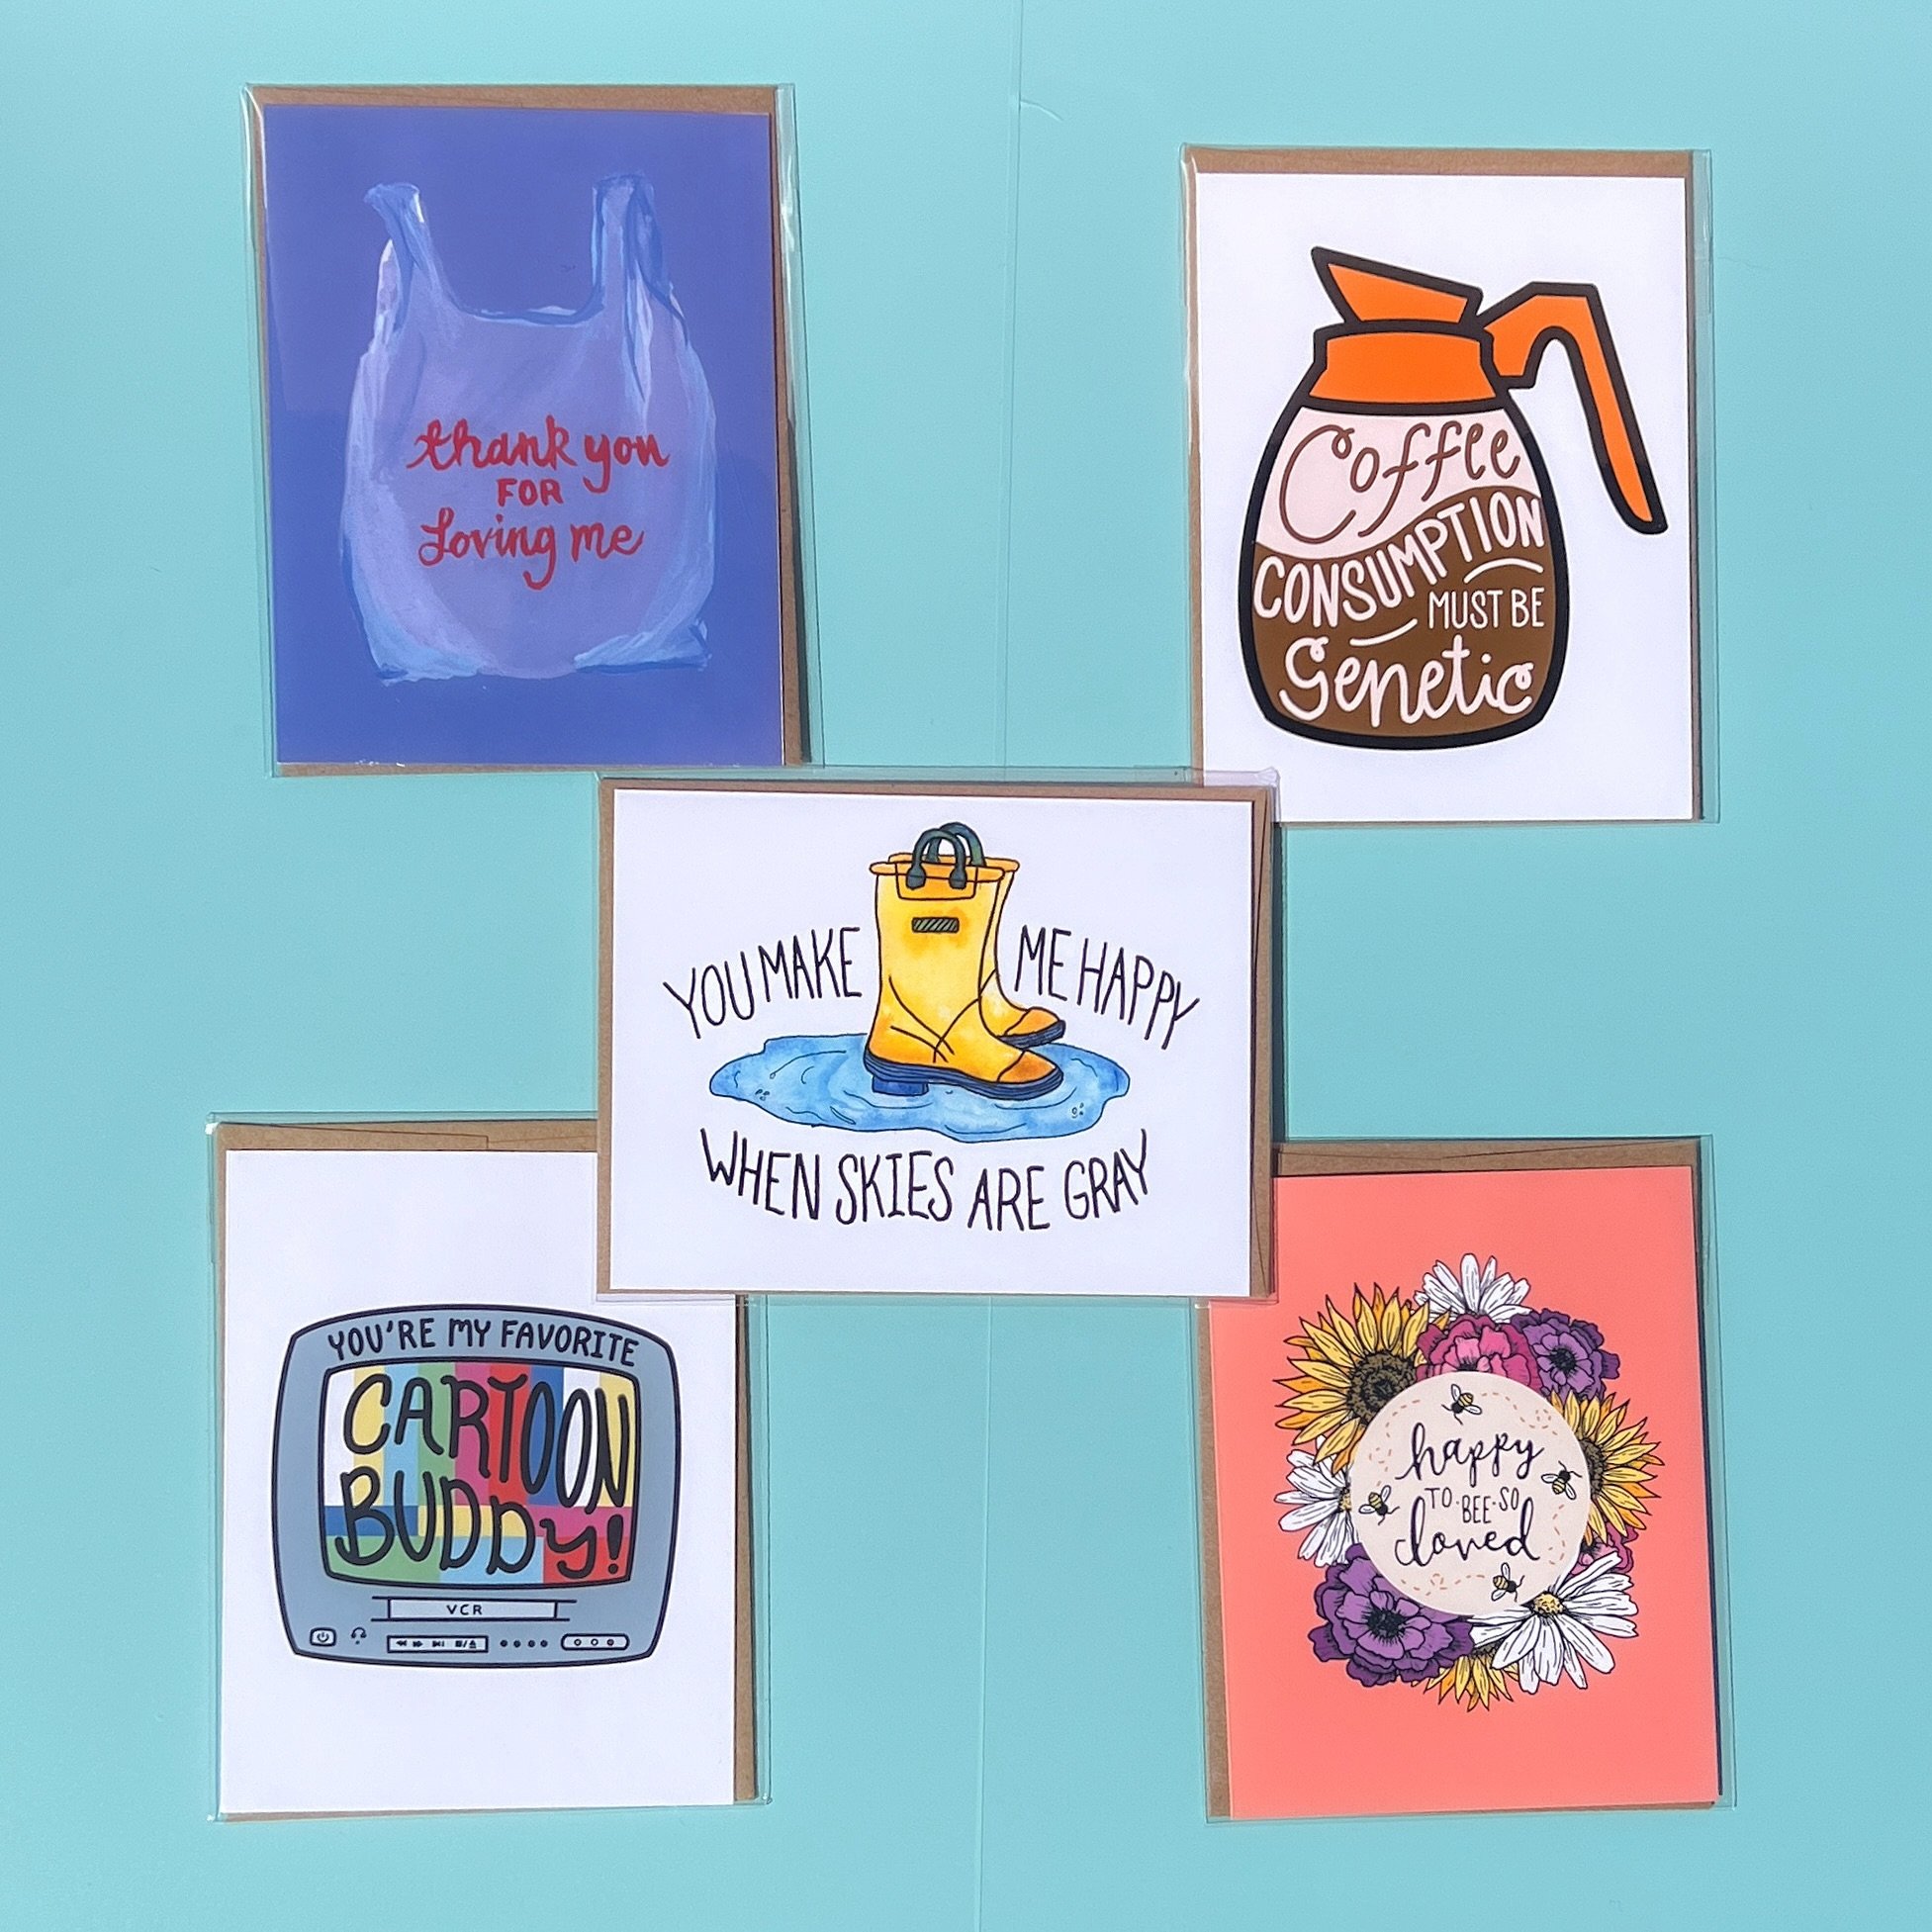 All my grownups can be found in these parenting cards. Moms, dads, grandparents, aunts, uncles and other caregivers take a place in childhood that truly make it special. And you know what grownups love? Cards! Show your love through a silly little ca